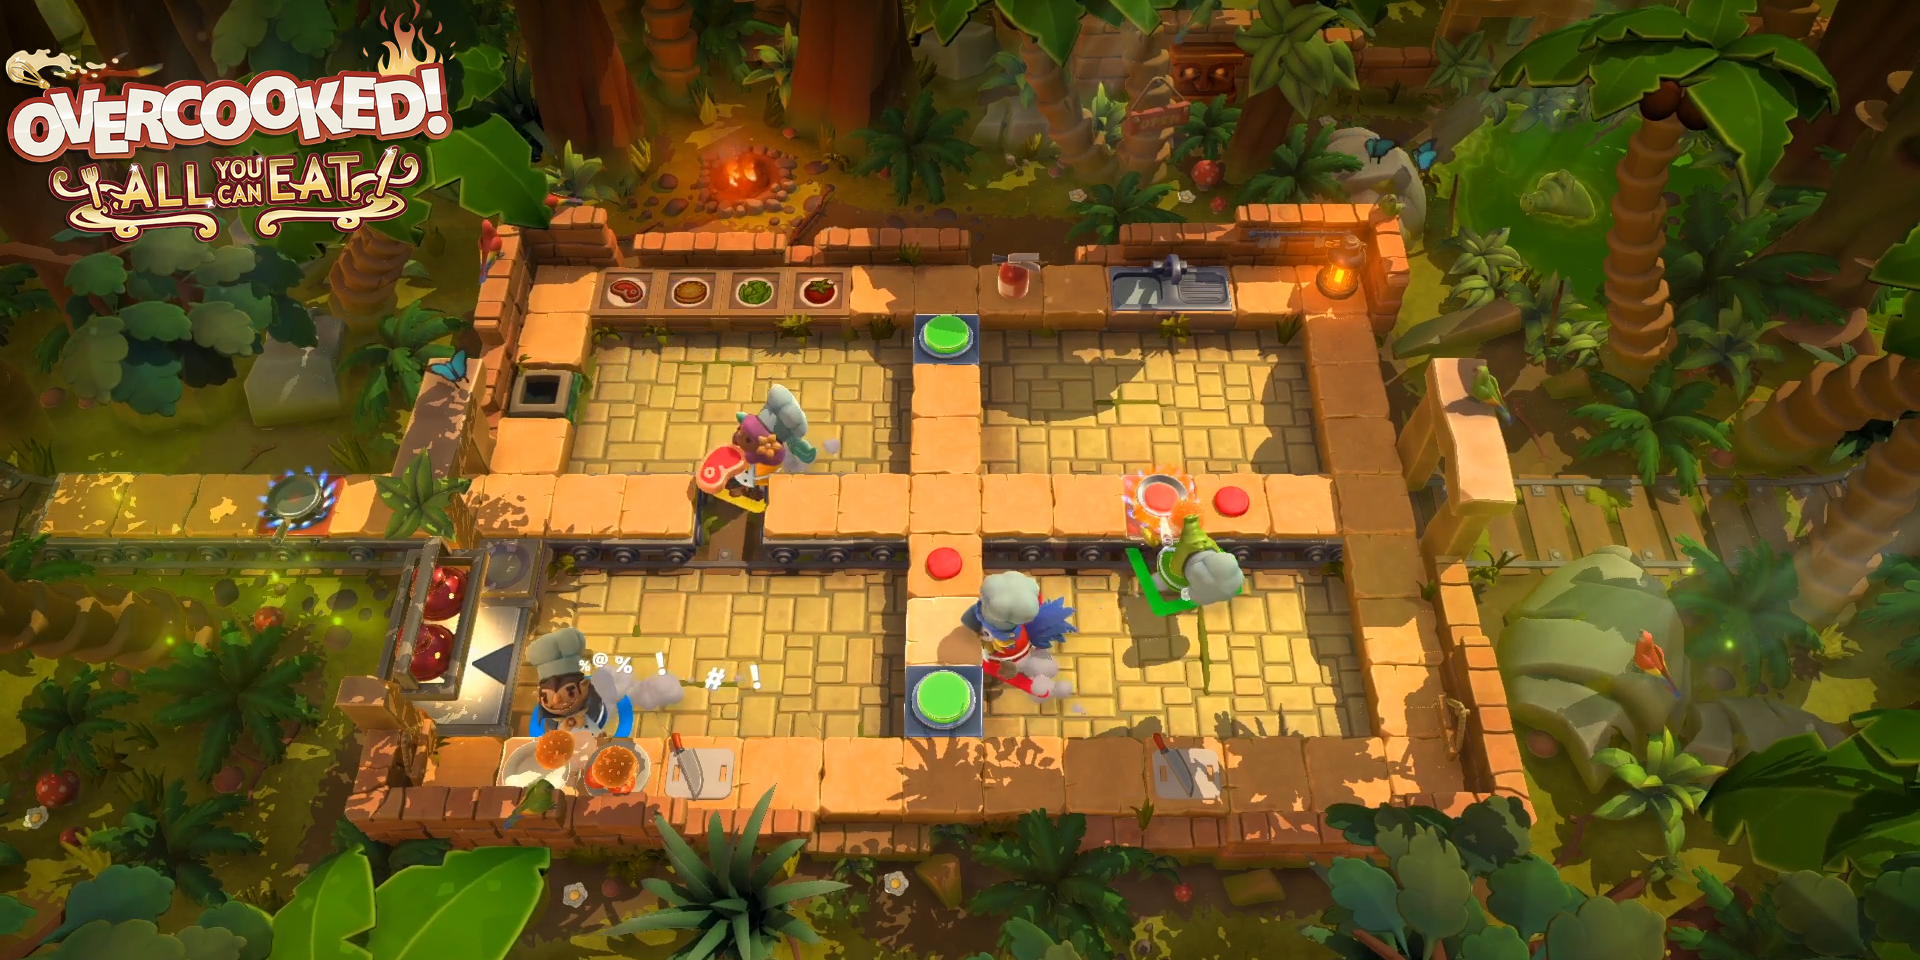 Overcooked All You Can Eat jungle kitchen level